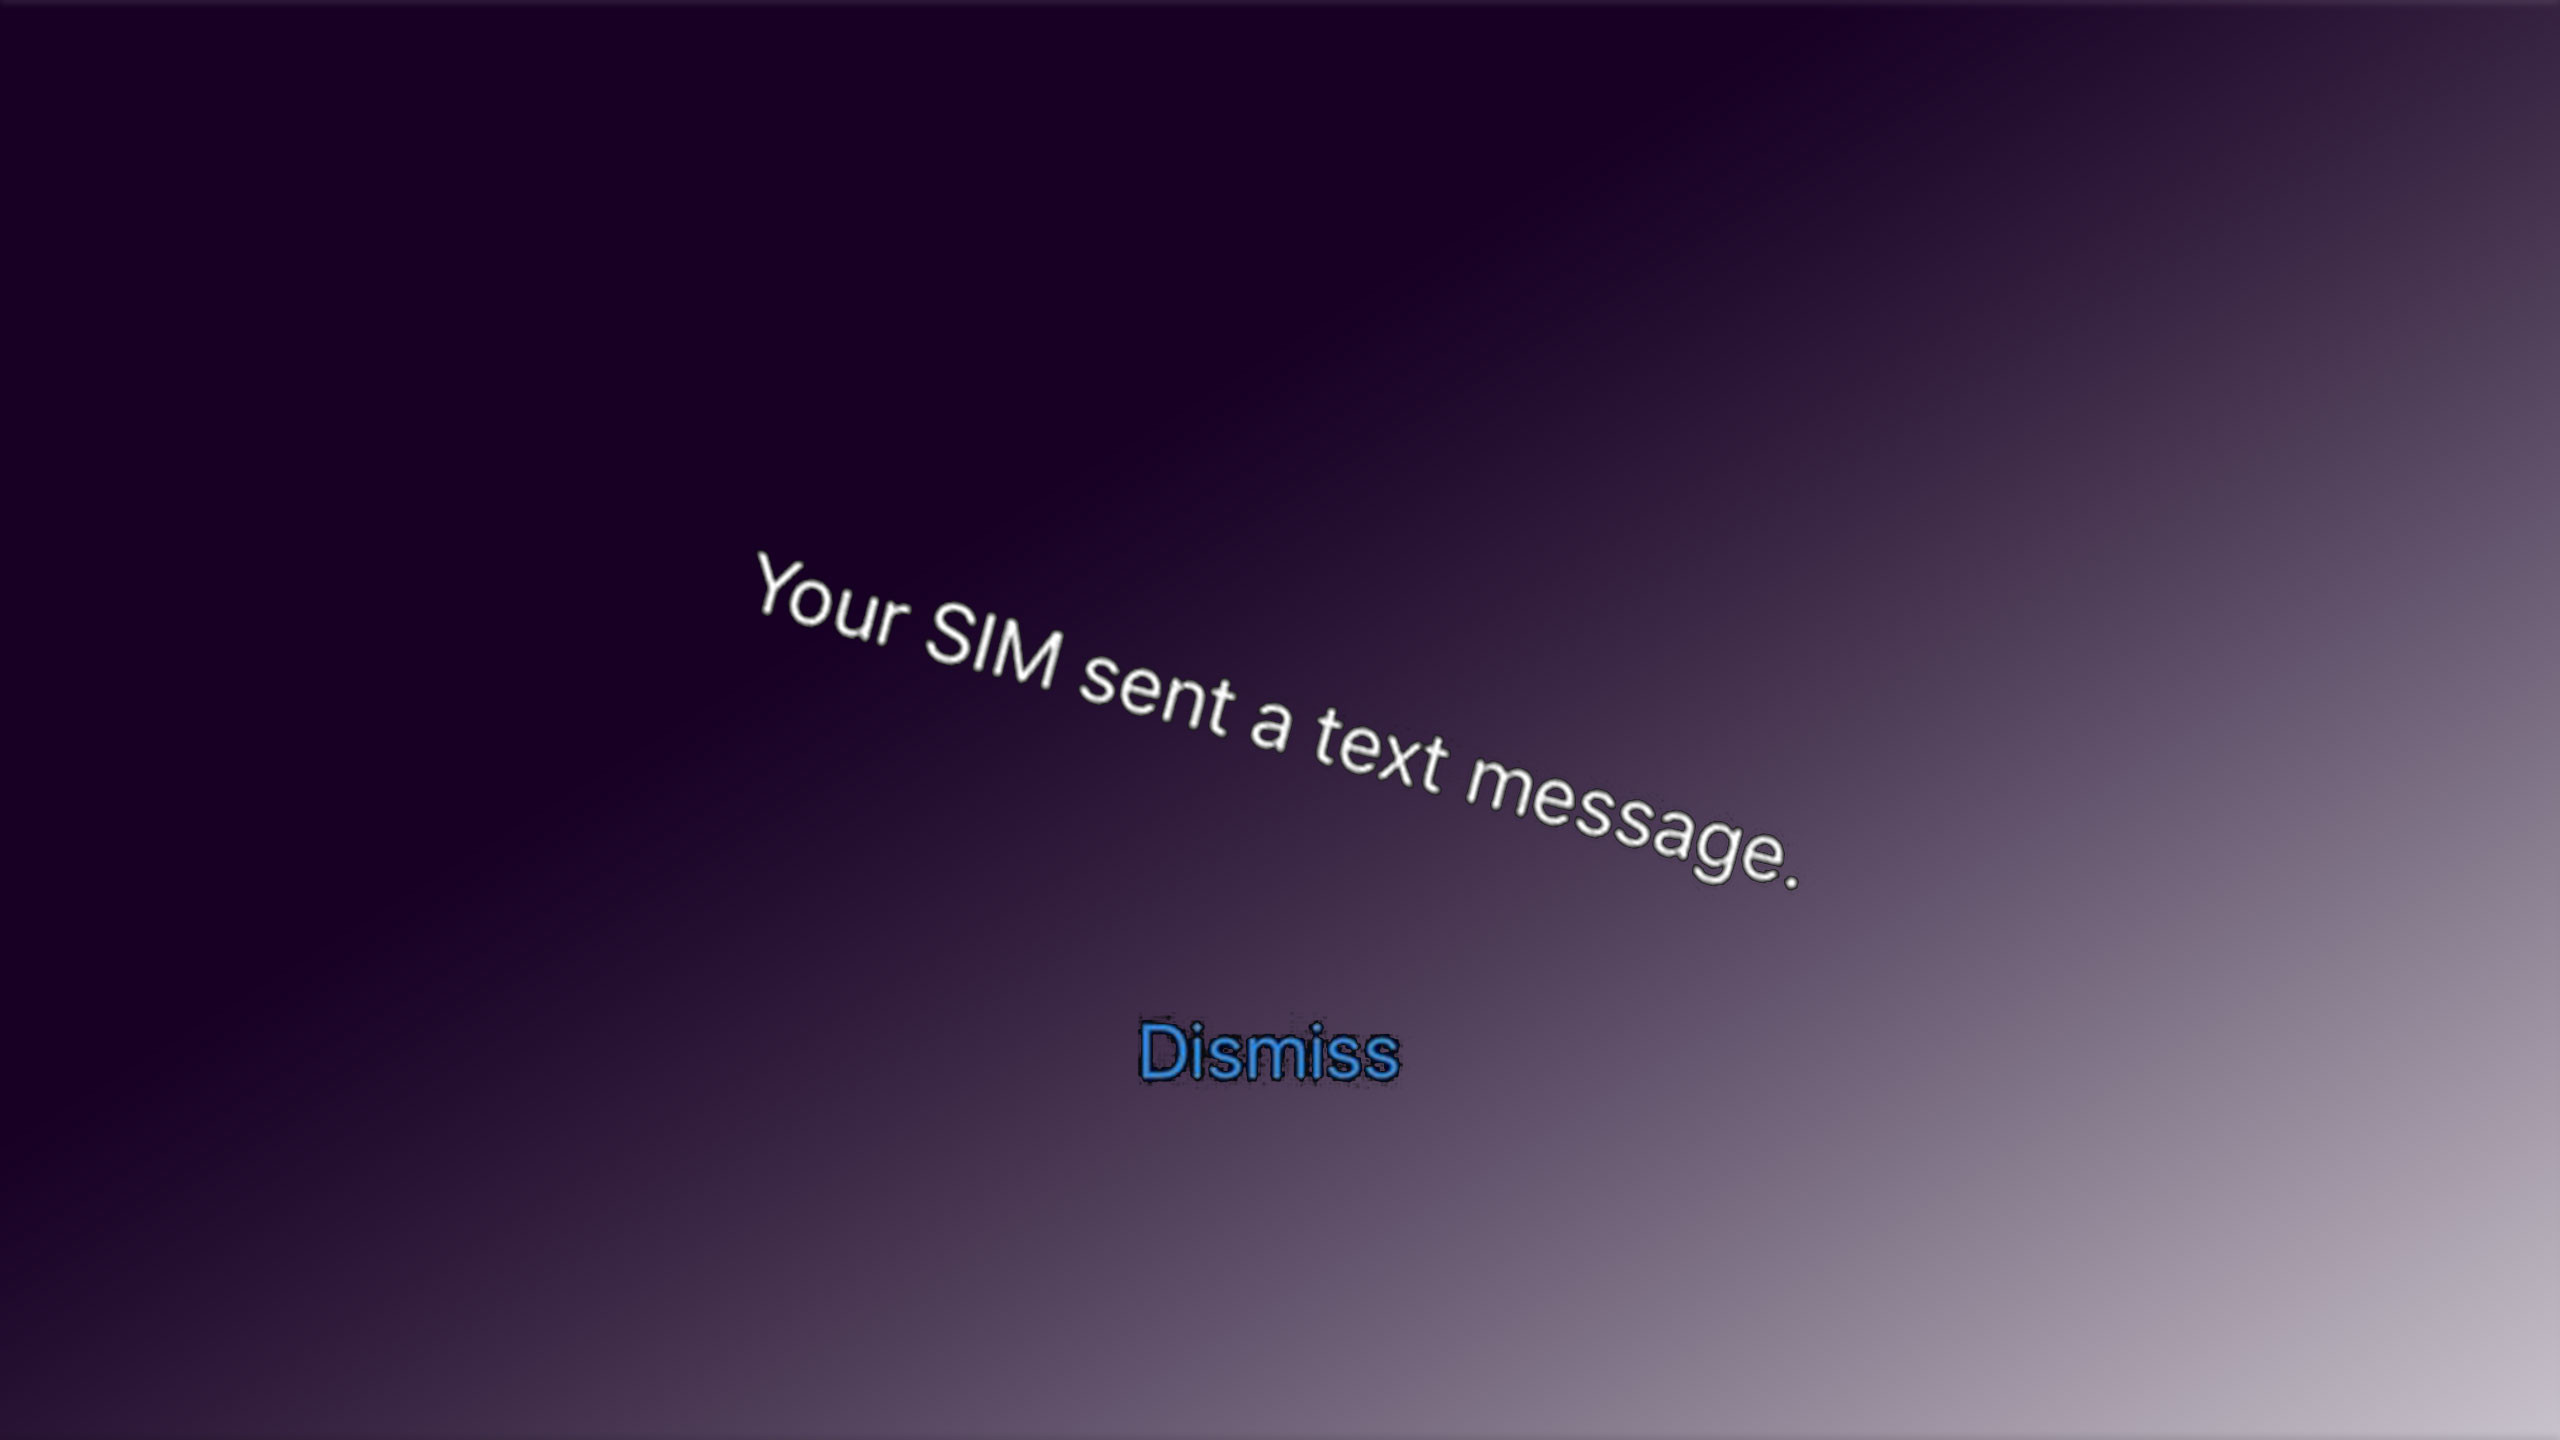 2560x1440 iPhone Says “Your SIM sent a text message”? Here's The Real Fix!